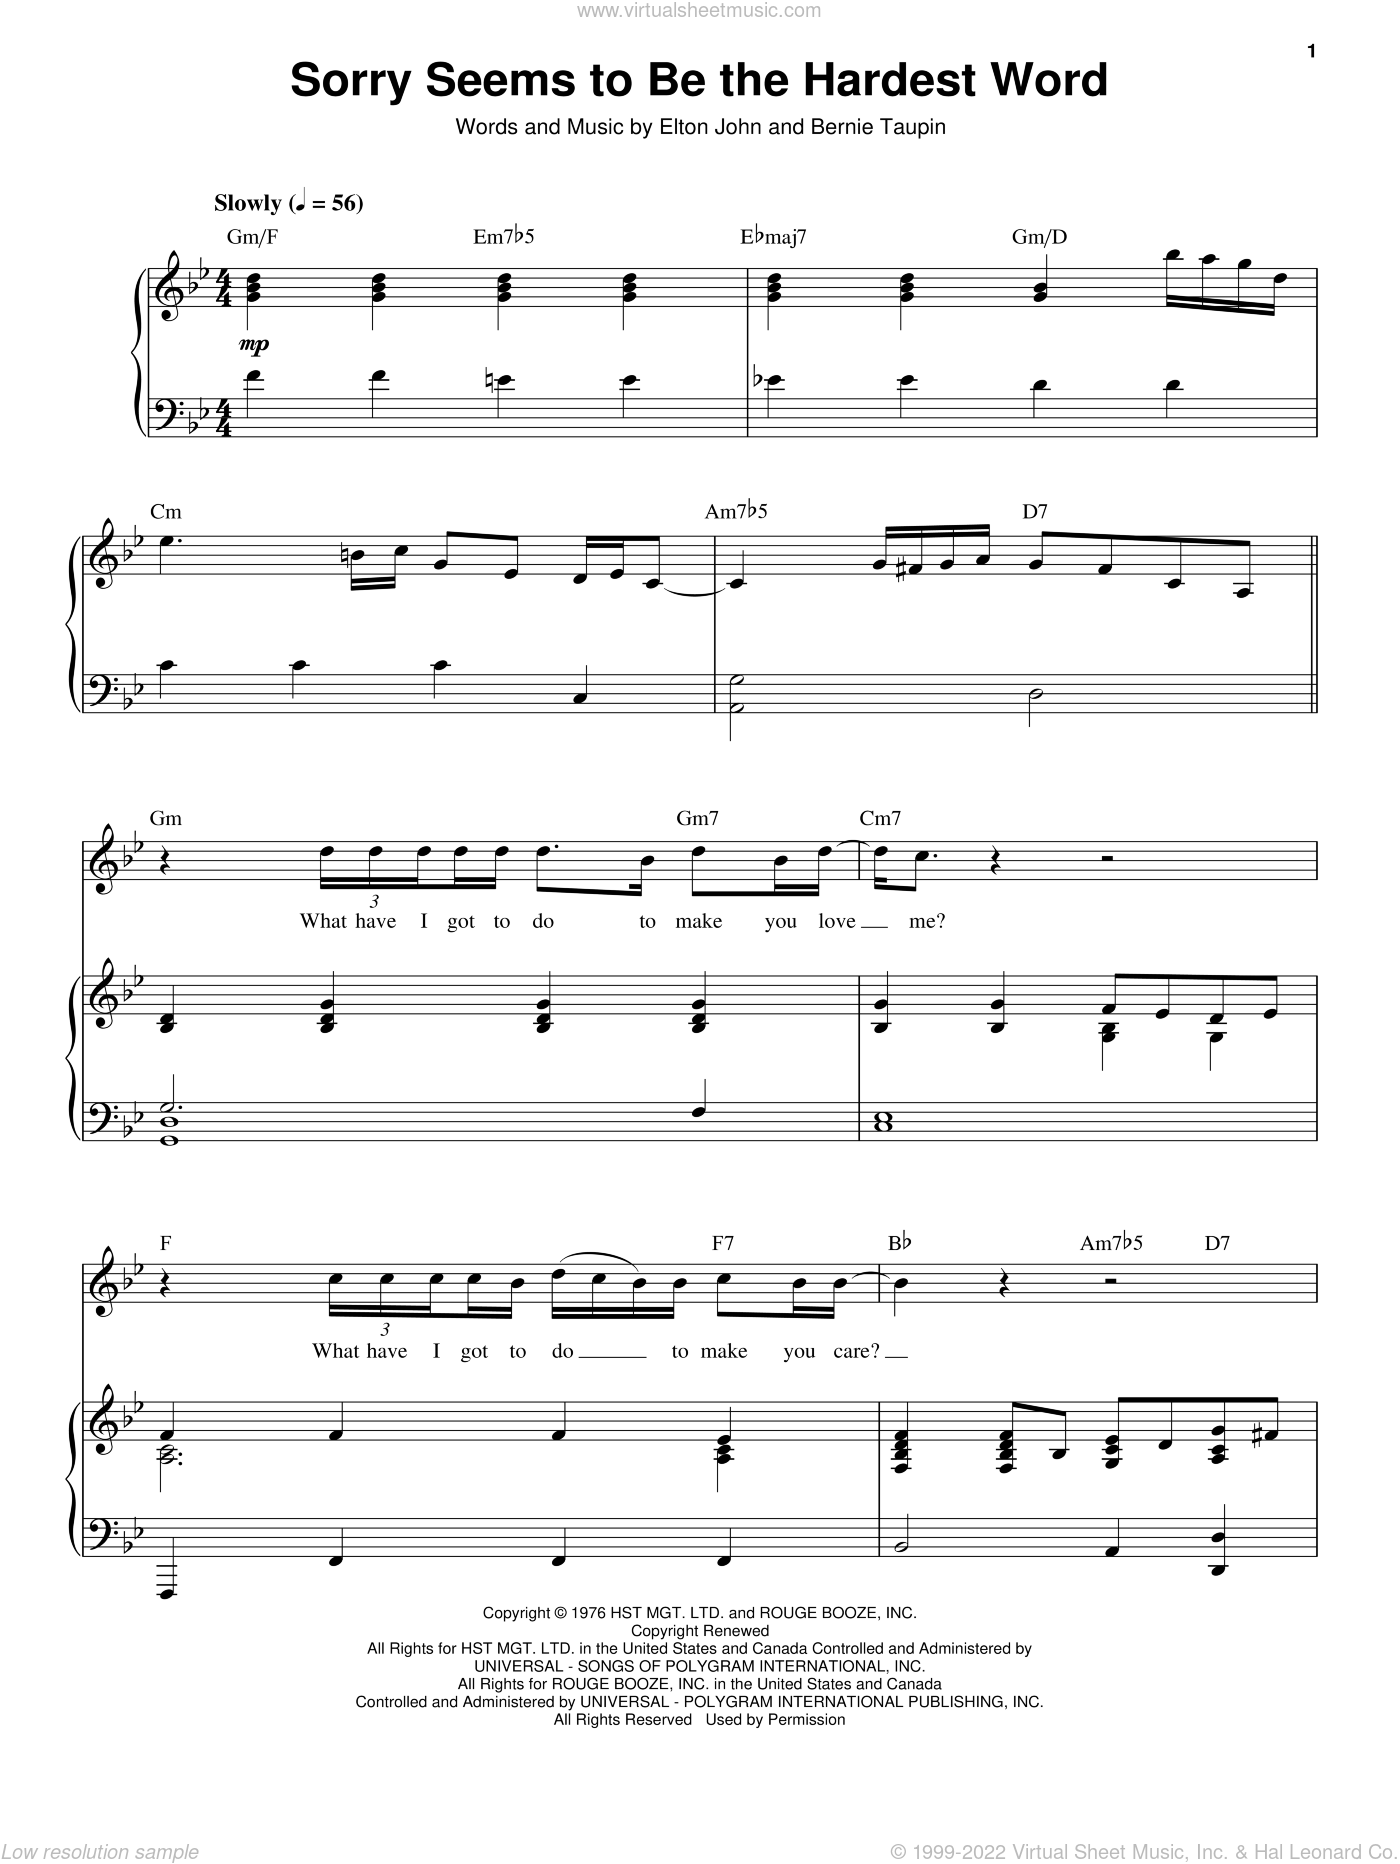 Sorry Seems To Be The Hardest Word sheet music for voice and piano